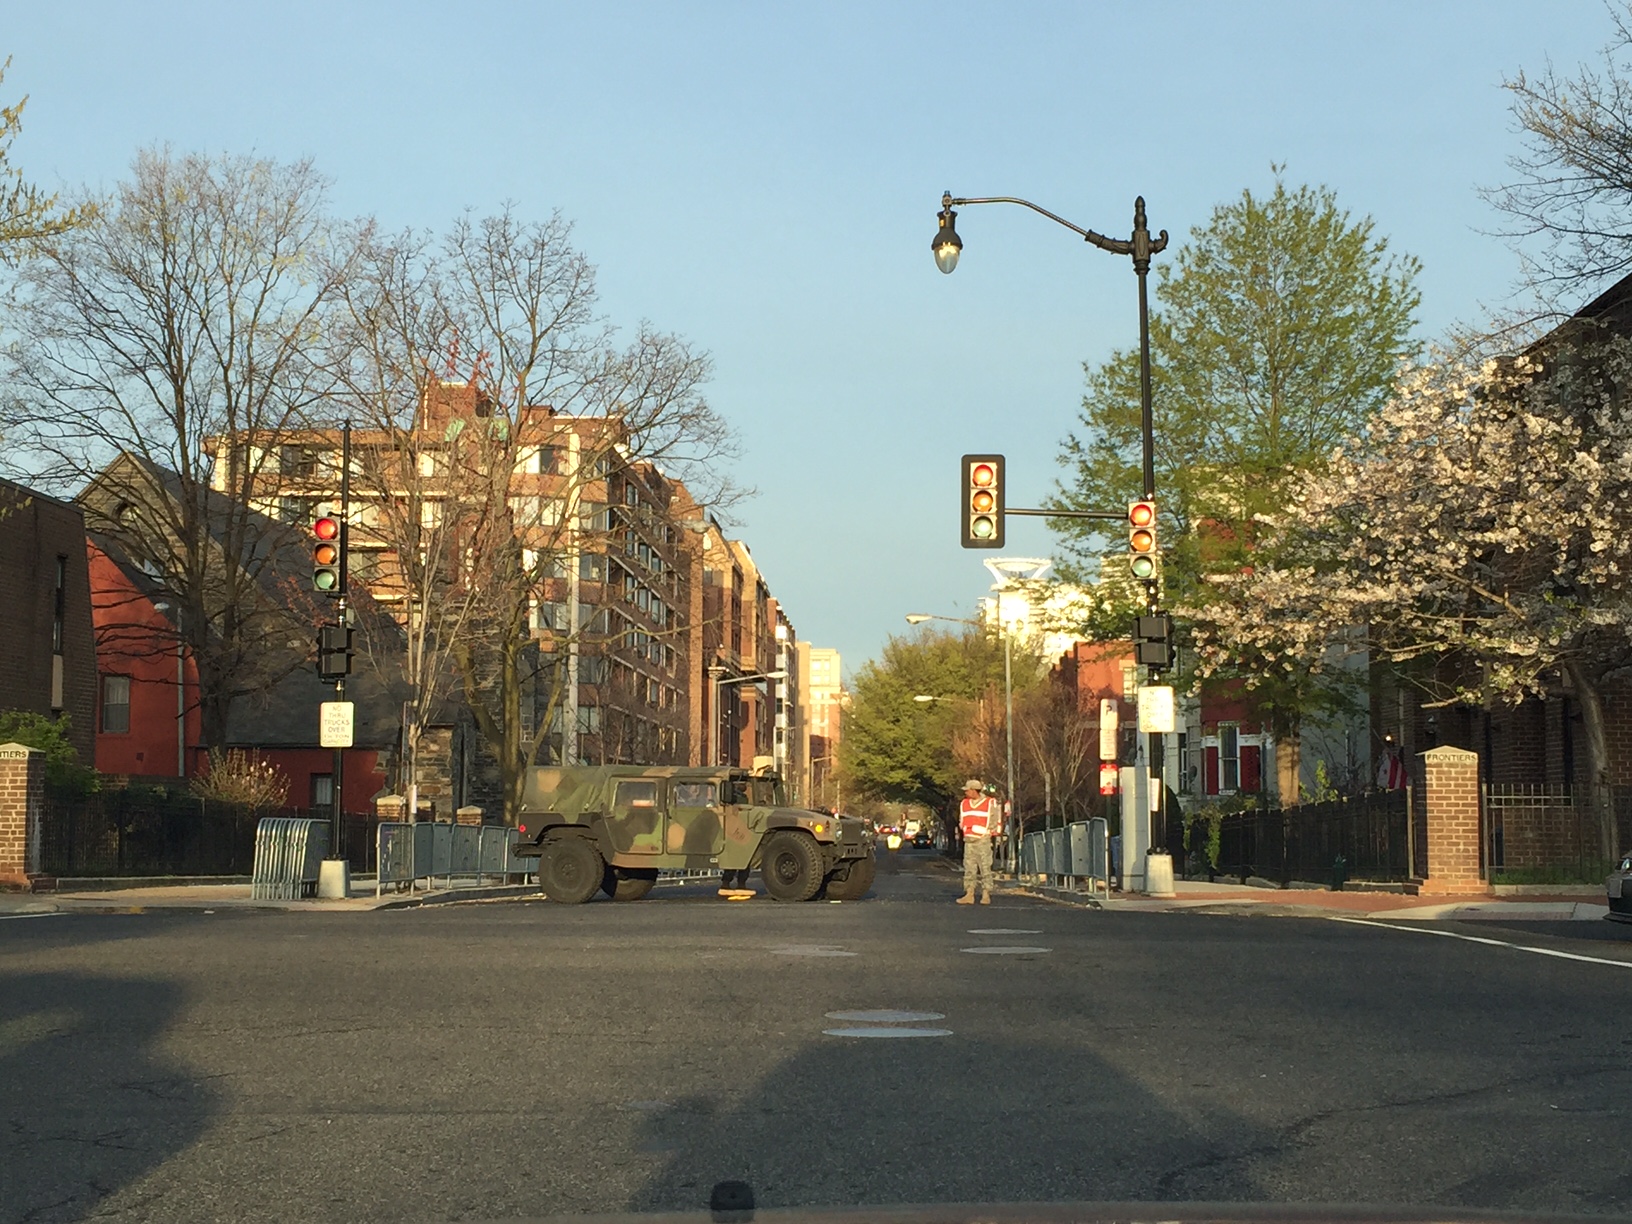 Streets are closing across D.C. in the wake of the Nuclear Security Summit. A military truck blocks the road as barricades are put up along D.C.sidewalks. (WTOP/ Dennis Foley)